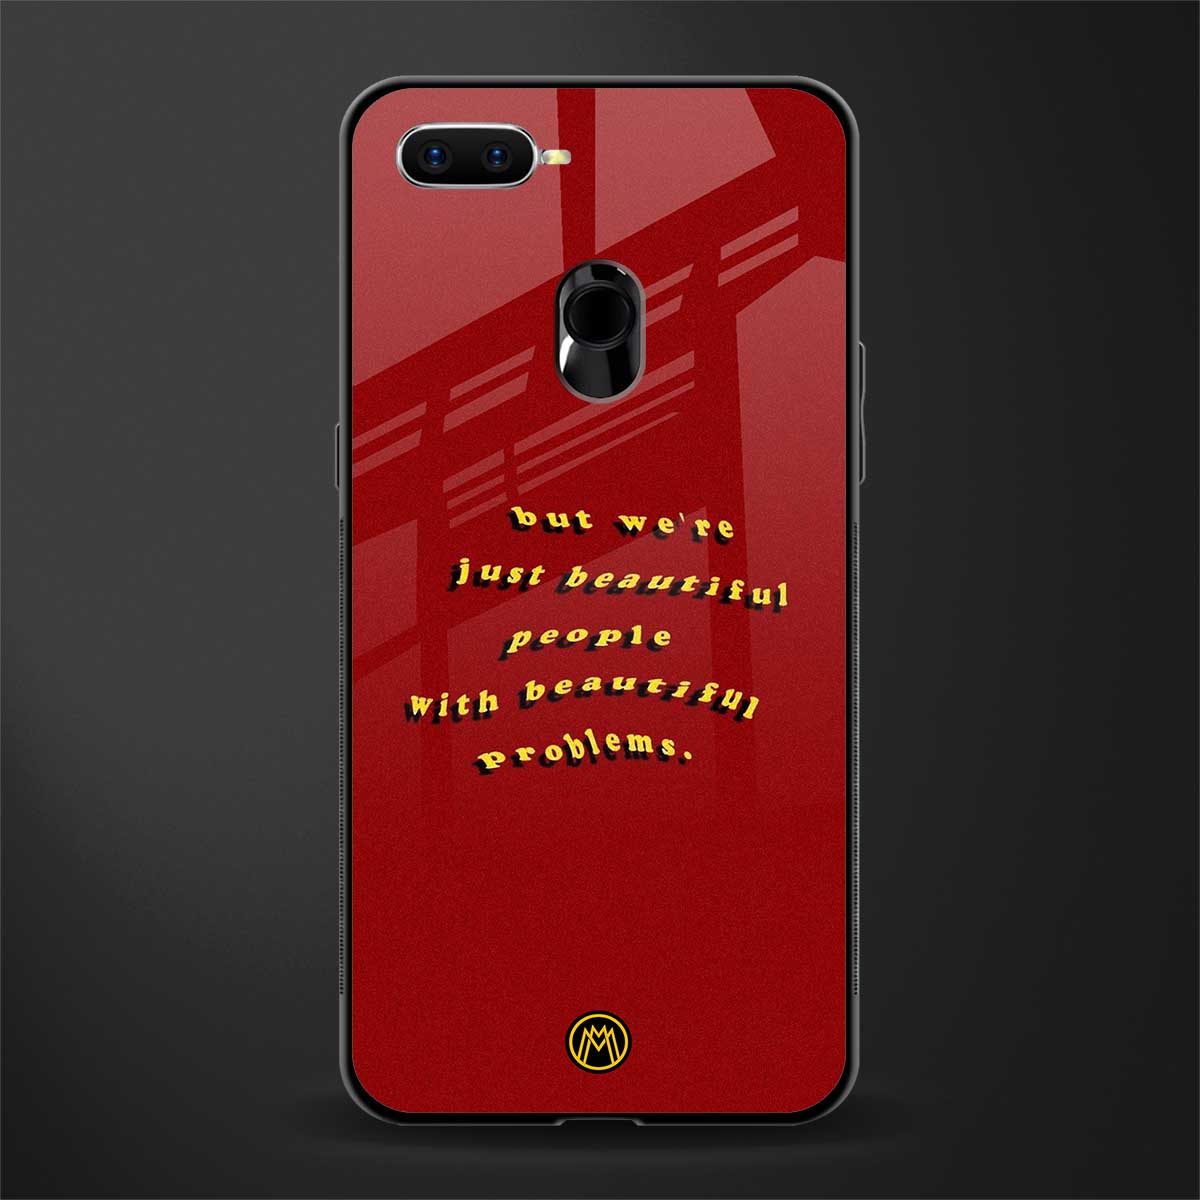 beautiful people with beautiful problems glass case for oppo a7 image